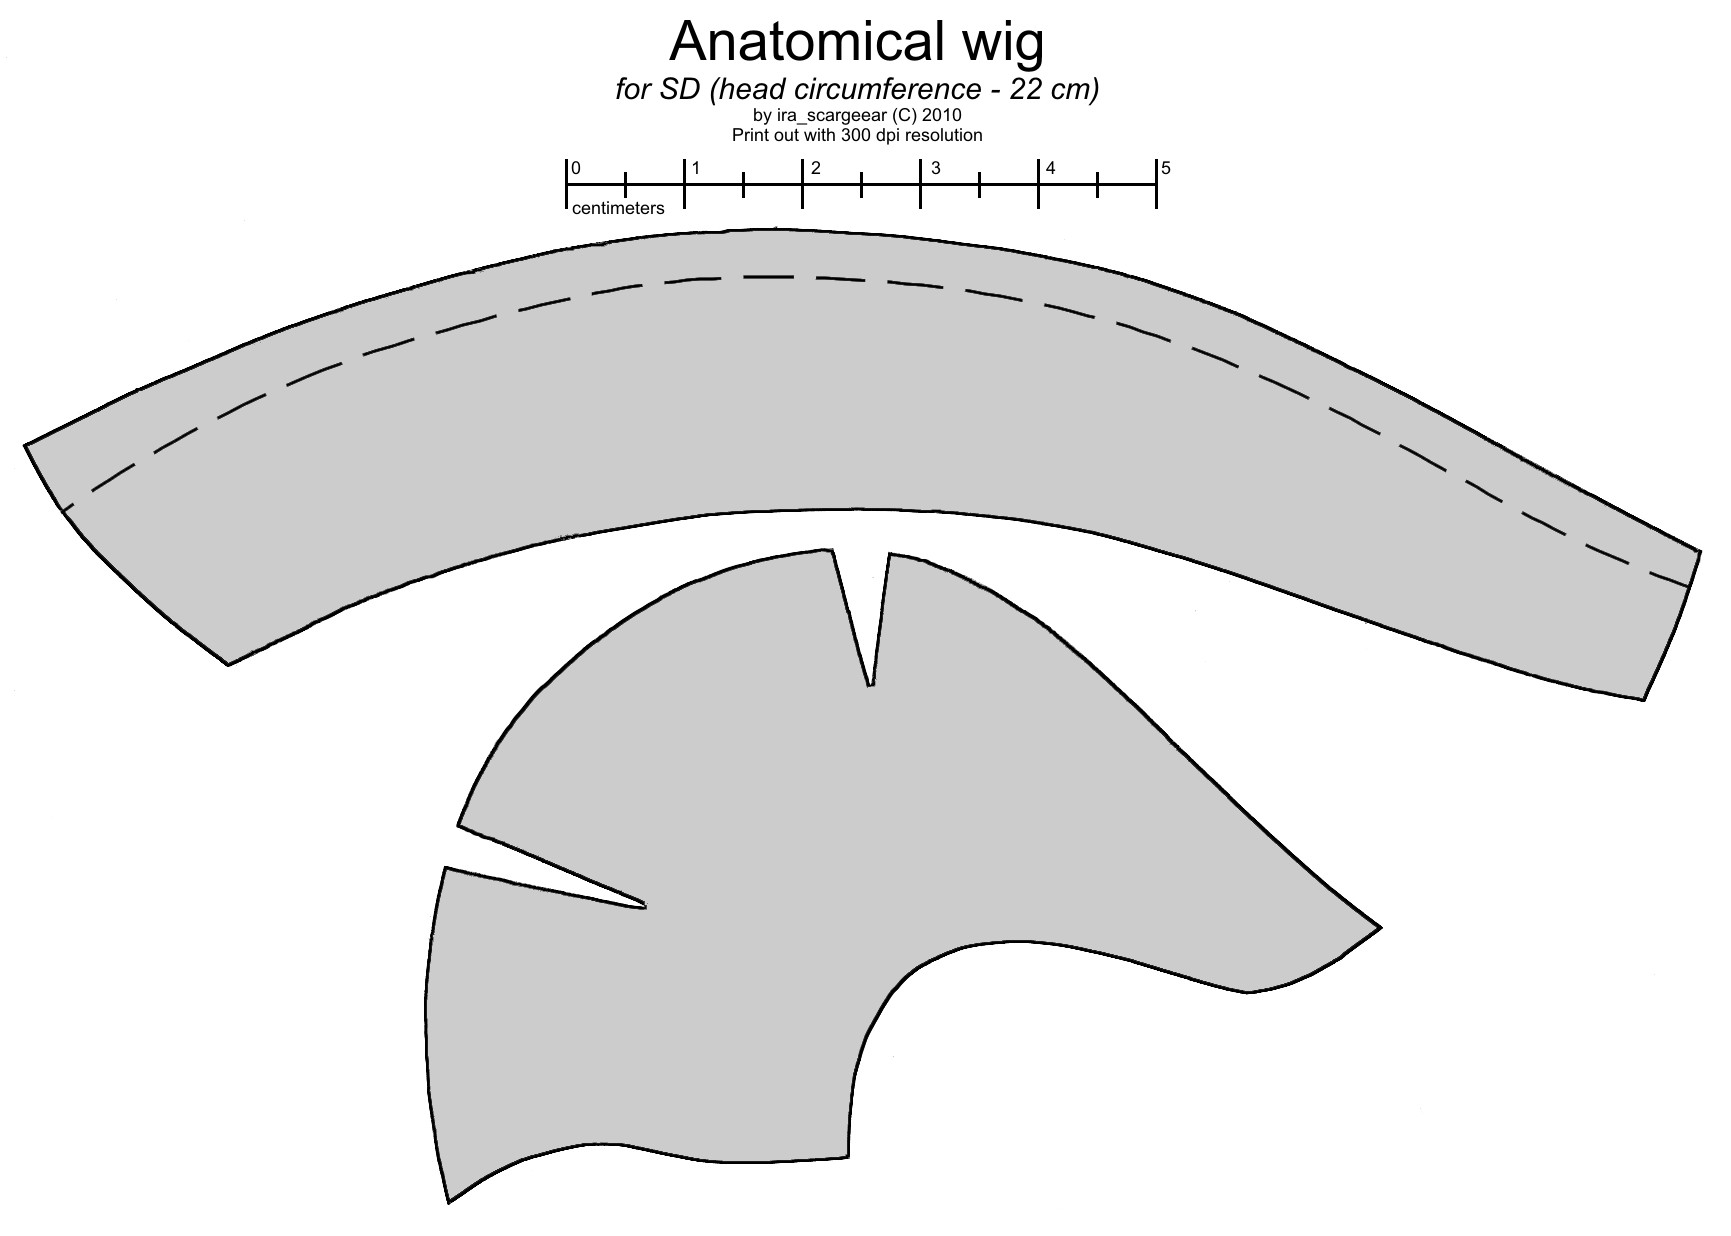 Anatomical wig for SD BJD doll